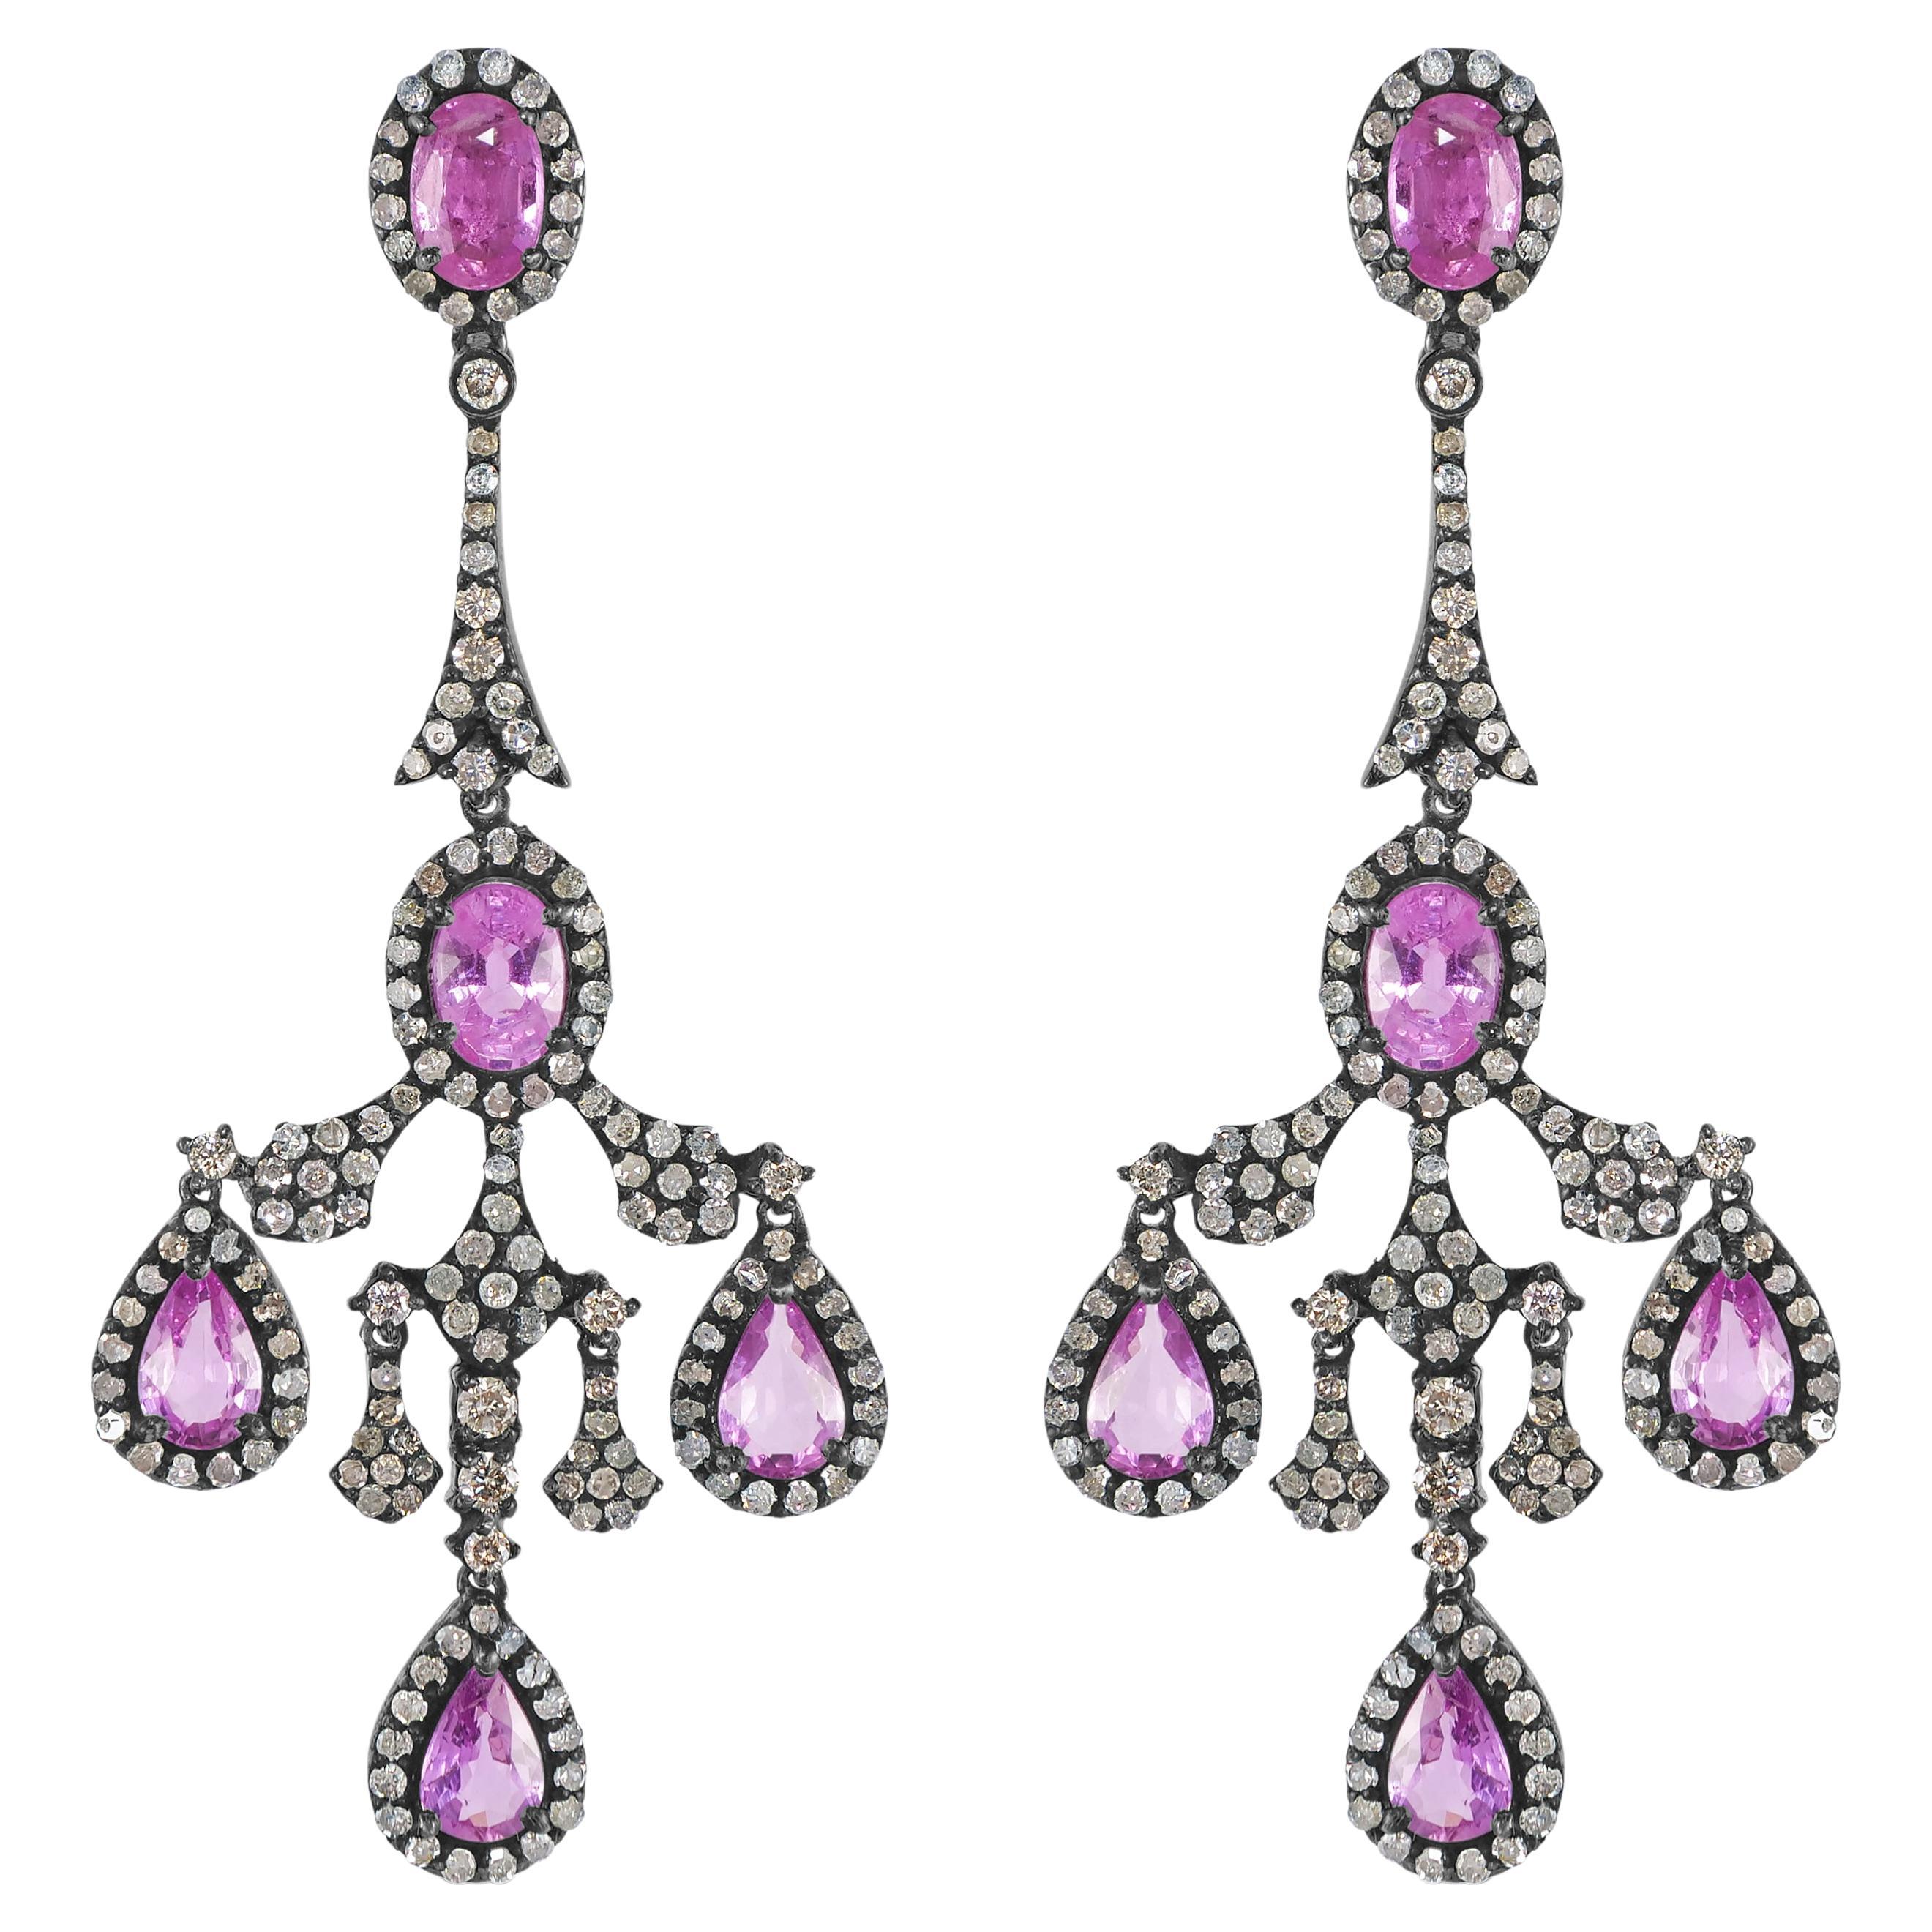 Victorian 6.6 Cttw. Pink Sapphire and Diamond Chandelier Earrings 